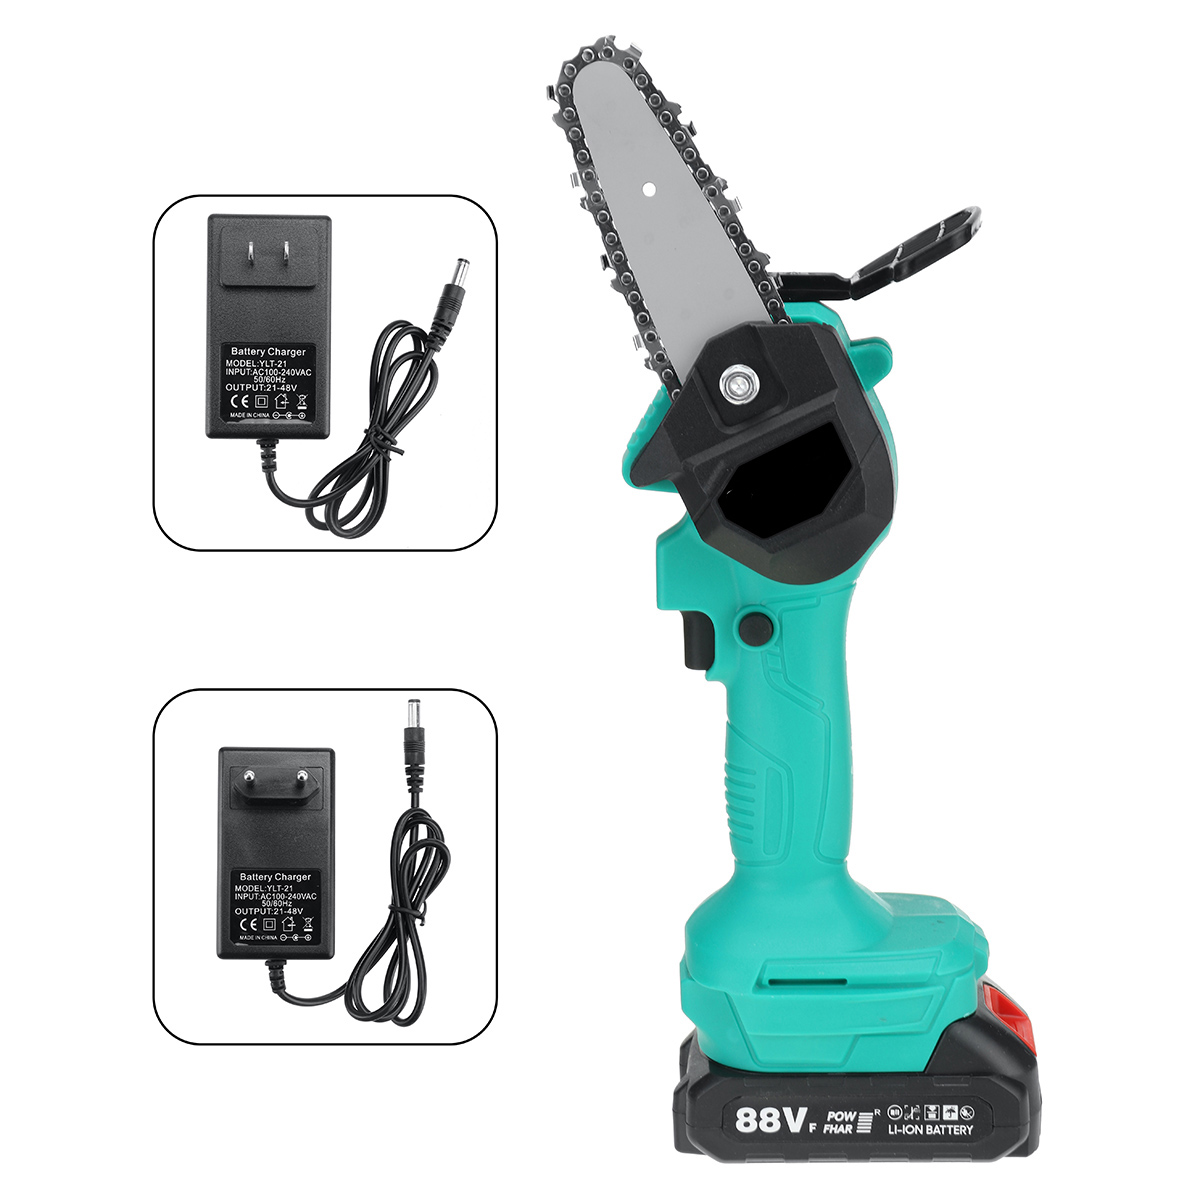 4in-1200W-Electric-Chain-Saw-Handheld-Logging-Saw-With-2pcs-7500mah-Battery-for-makita-Battery-1798208-9